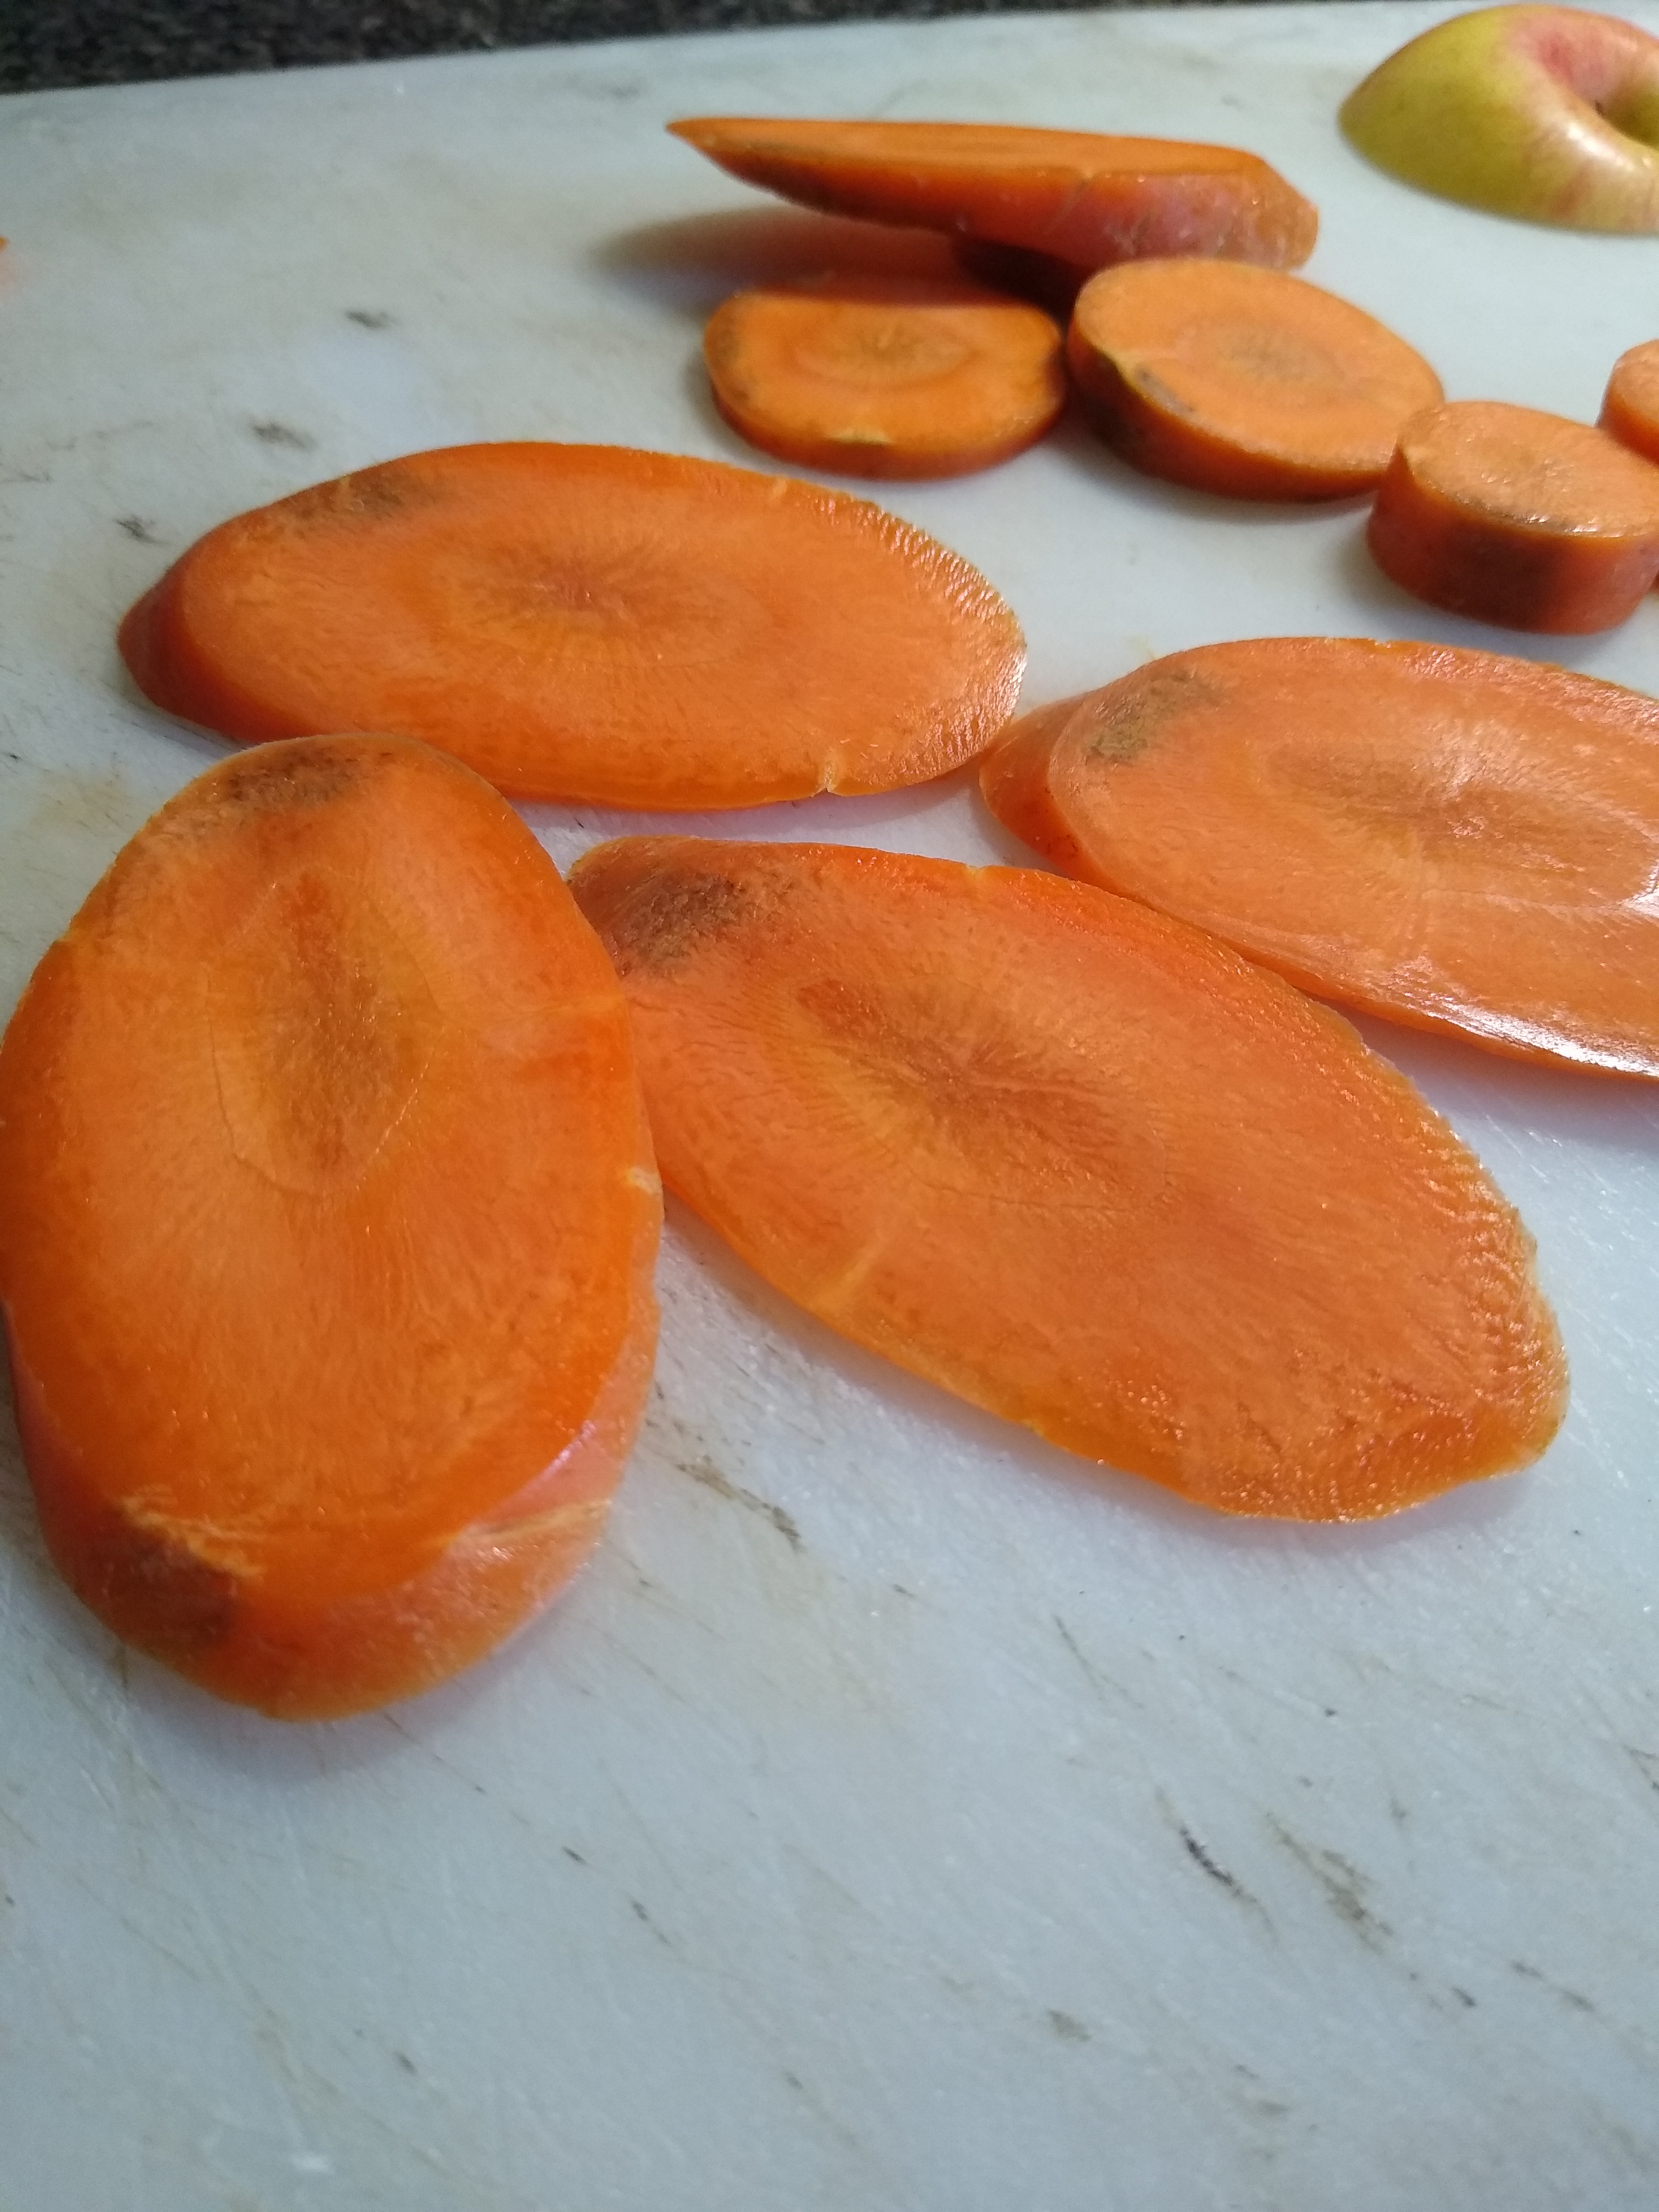 Thin slices of carrot.